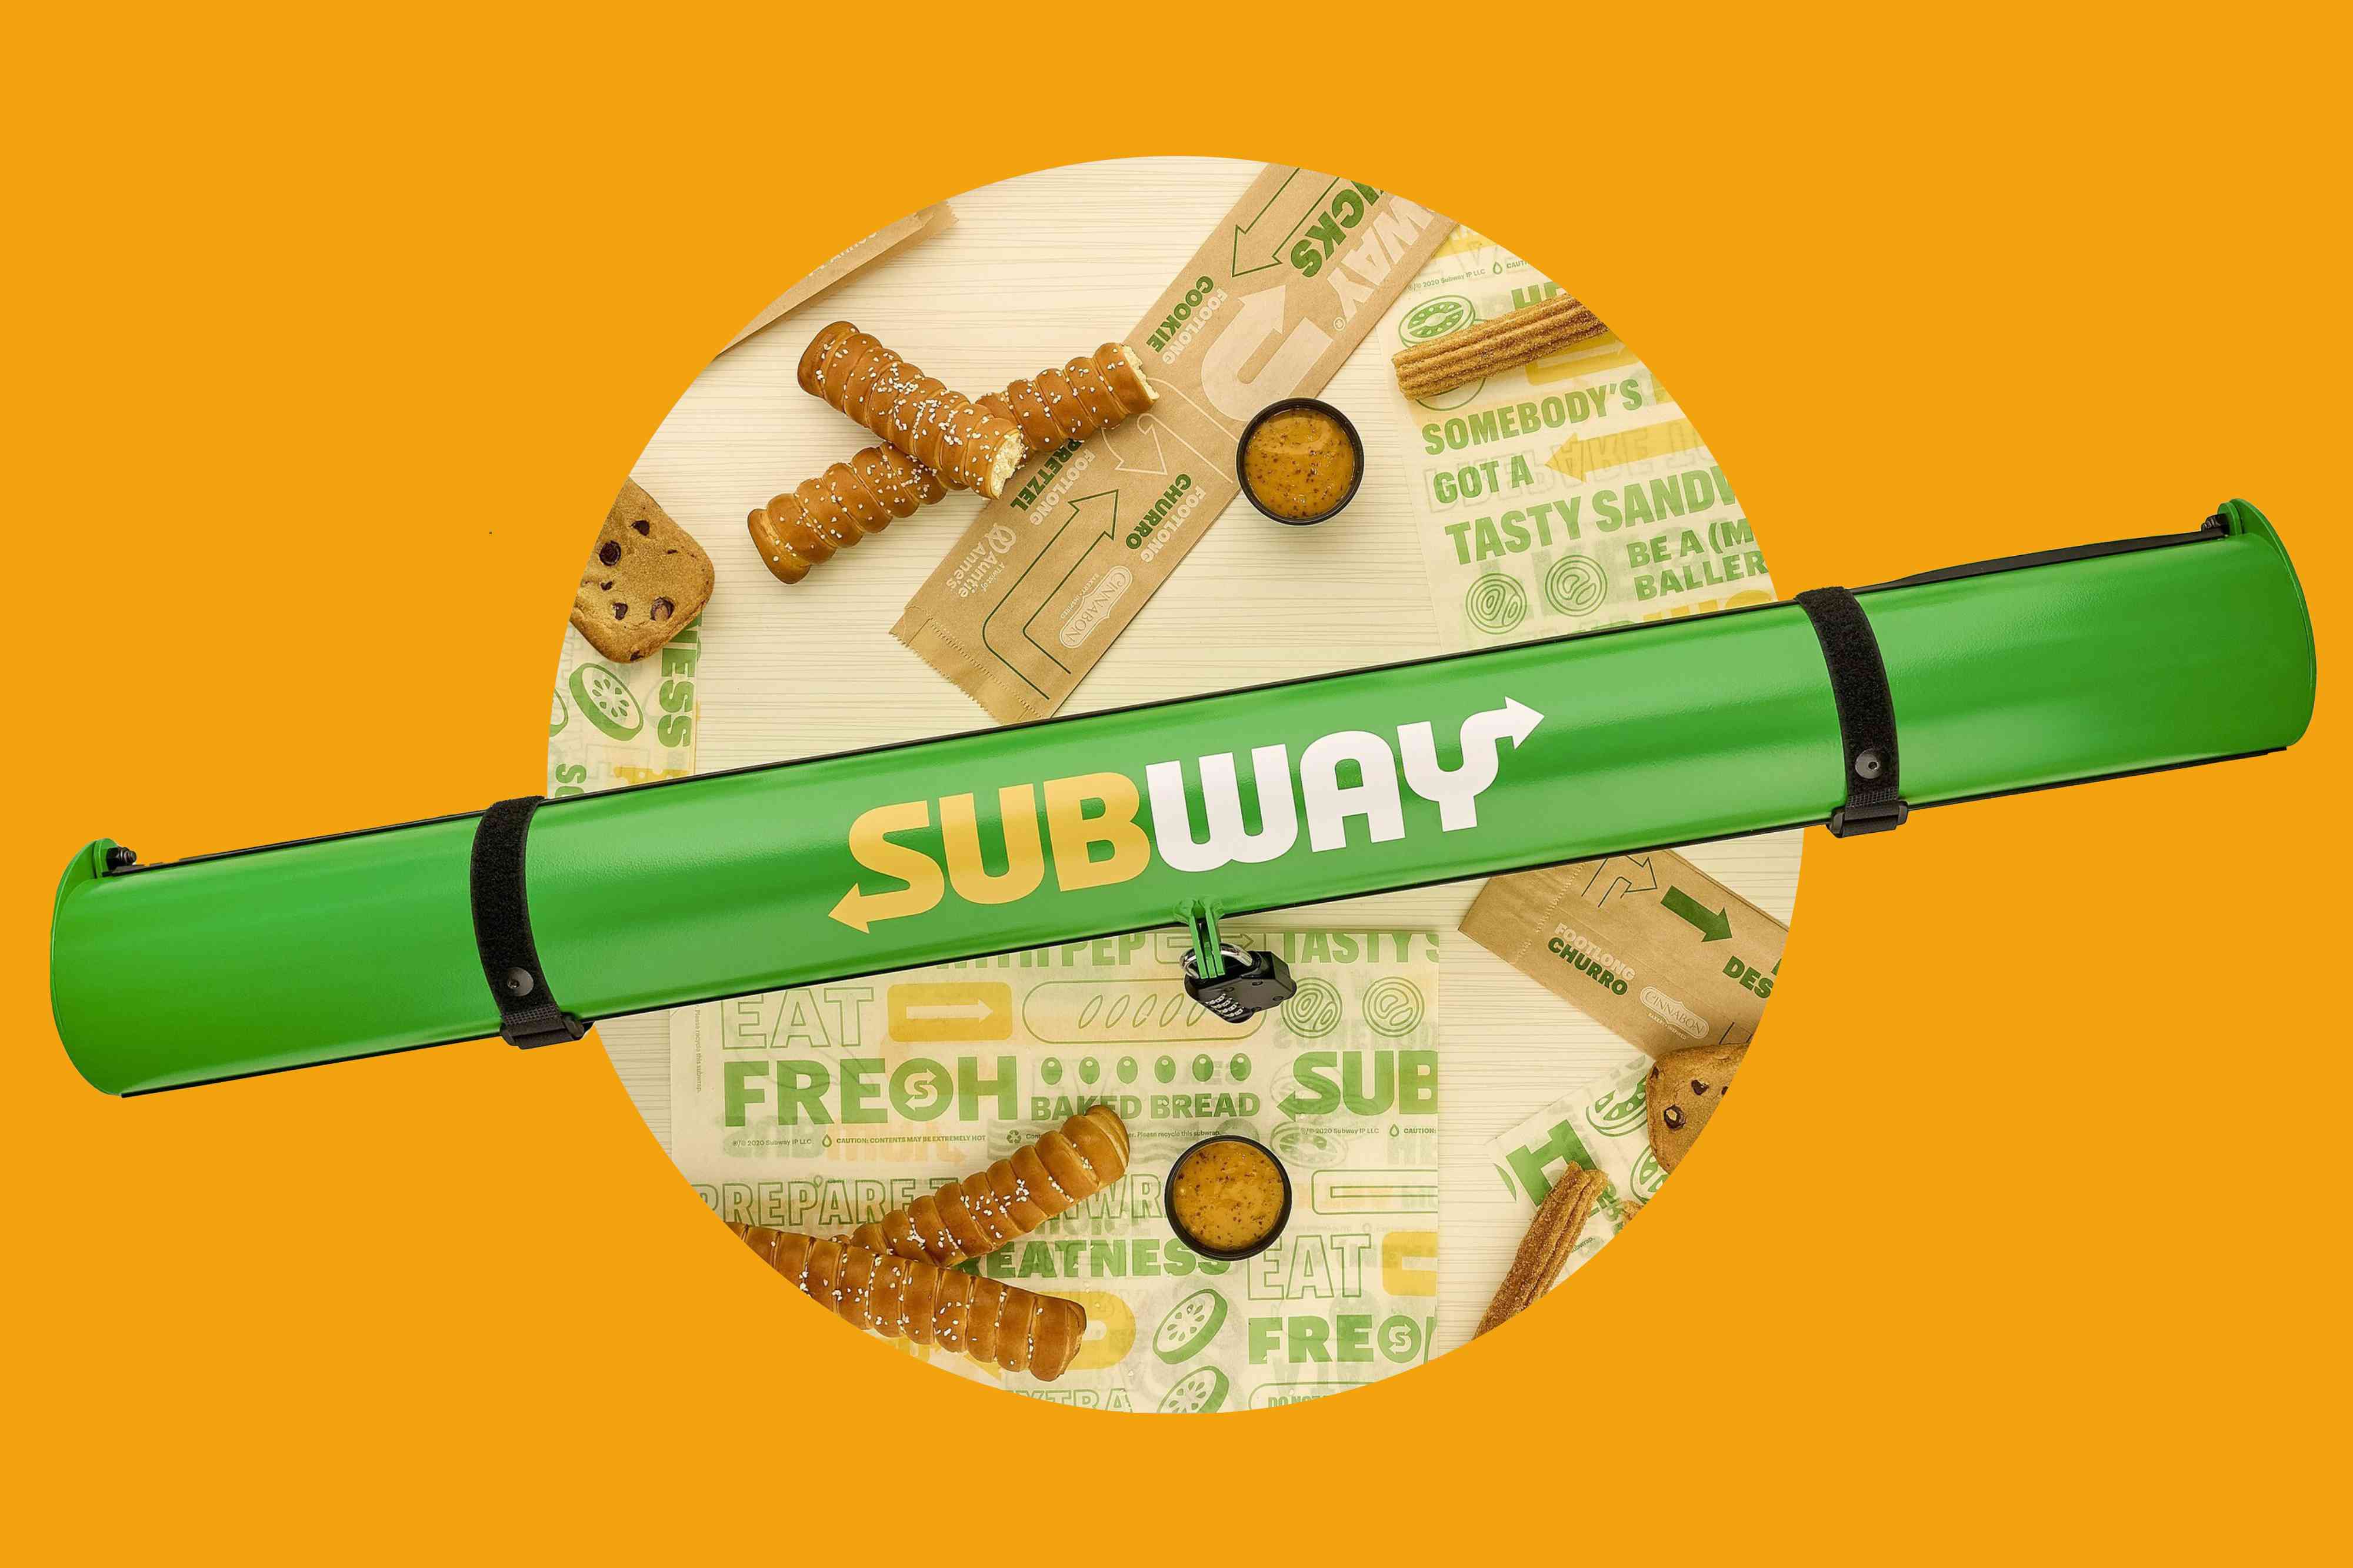 how to, subway is releasing a 'sidekick' bag capable of storing 3 footlongs at once — here's how to win one